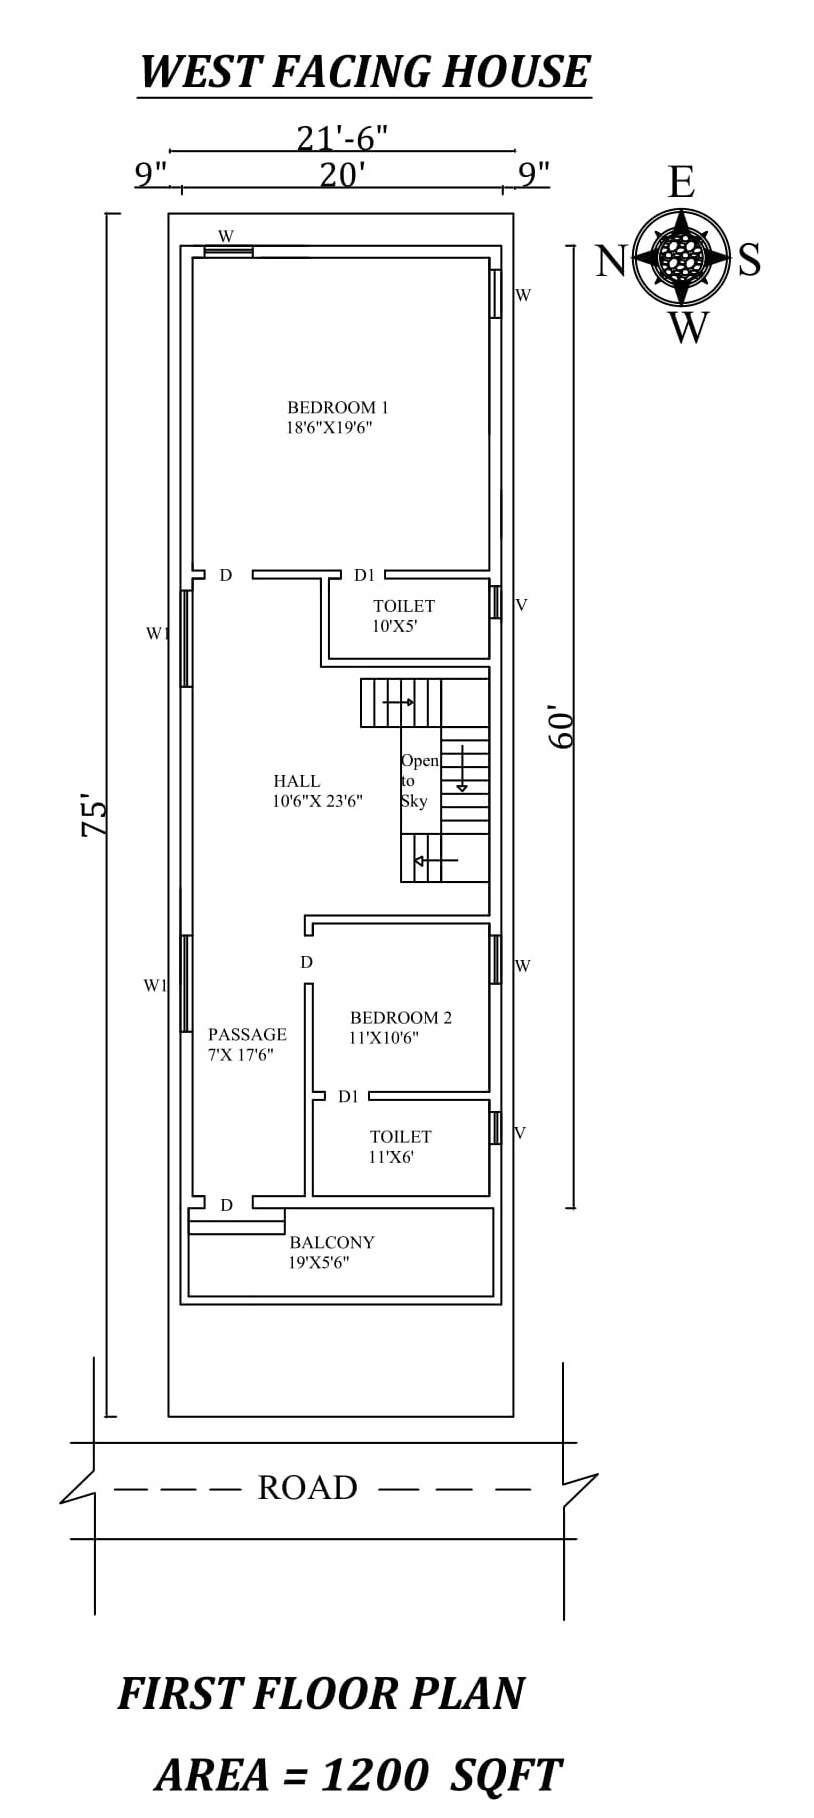 21'6"X75' Single bhk West facing First floor House Plan As